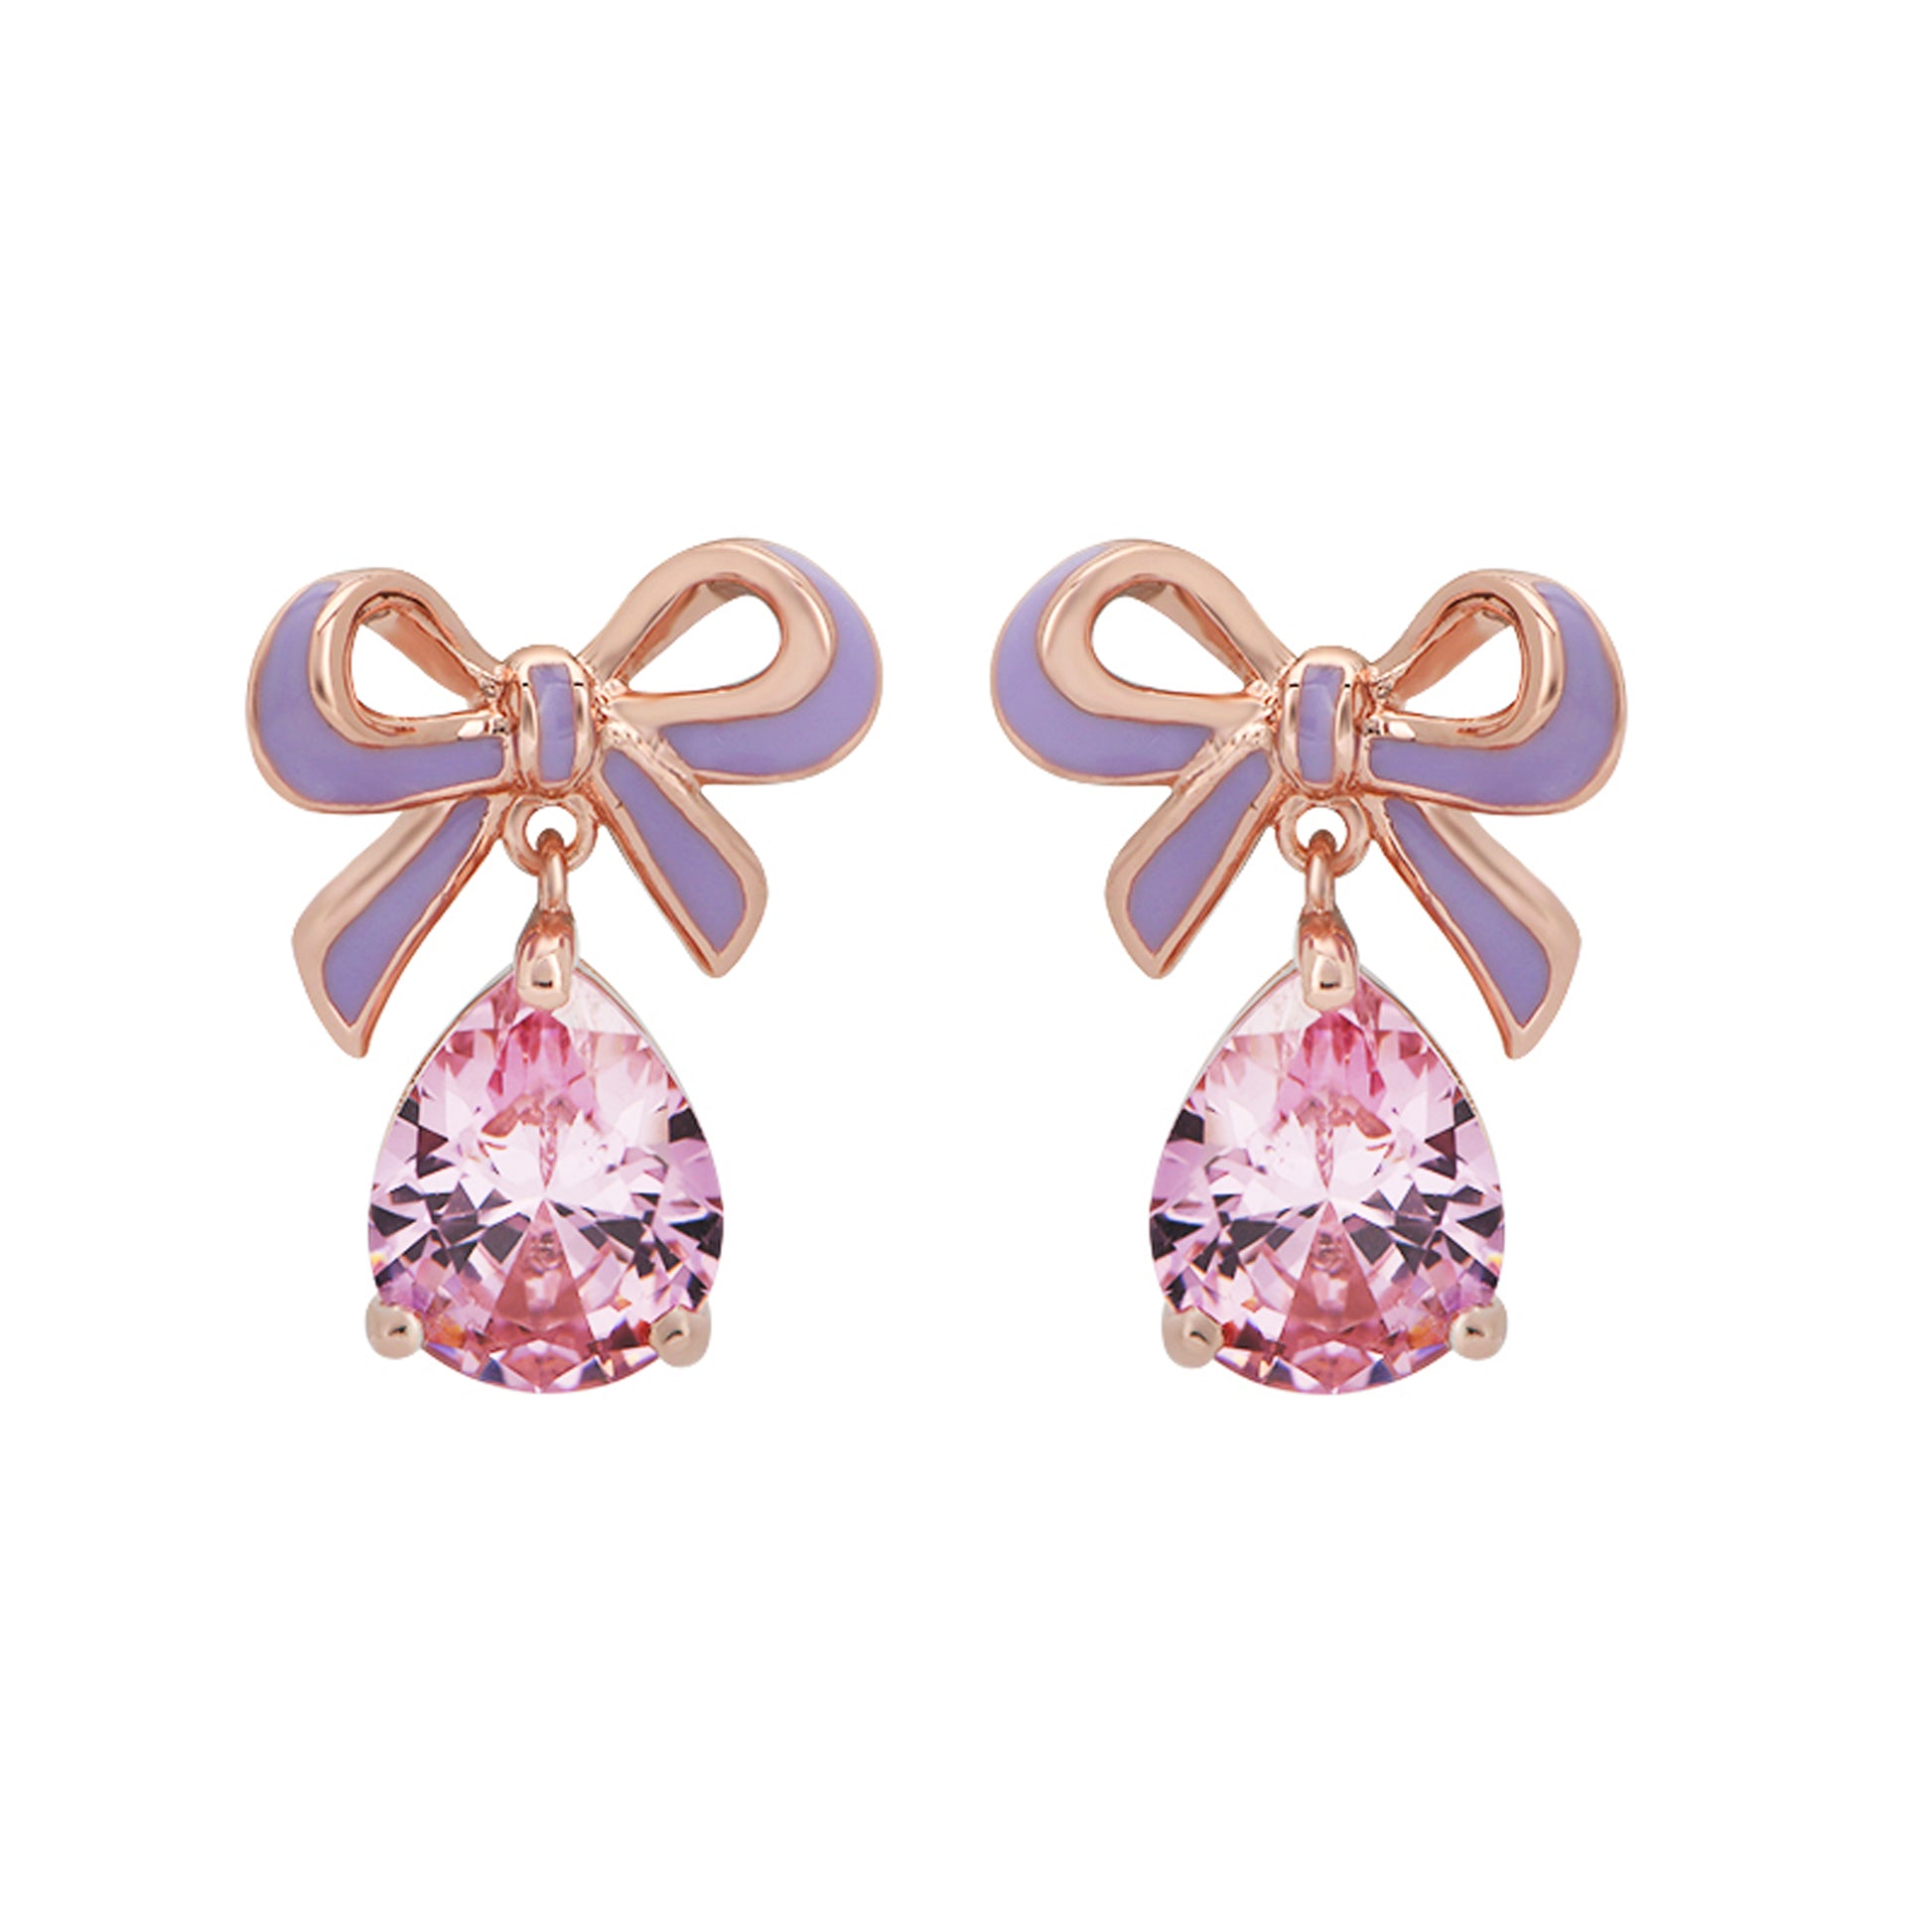 Amelia Scott Pink Bow Earrings Lilac, Blush Pink & Rose Gold